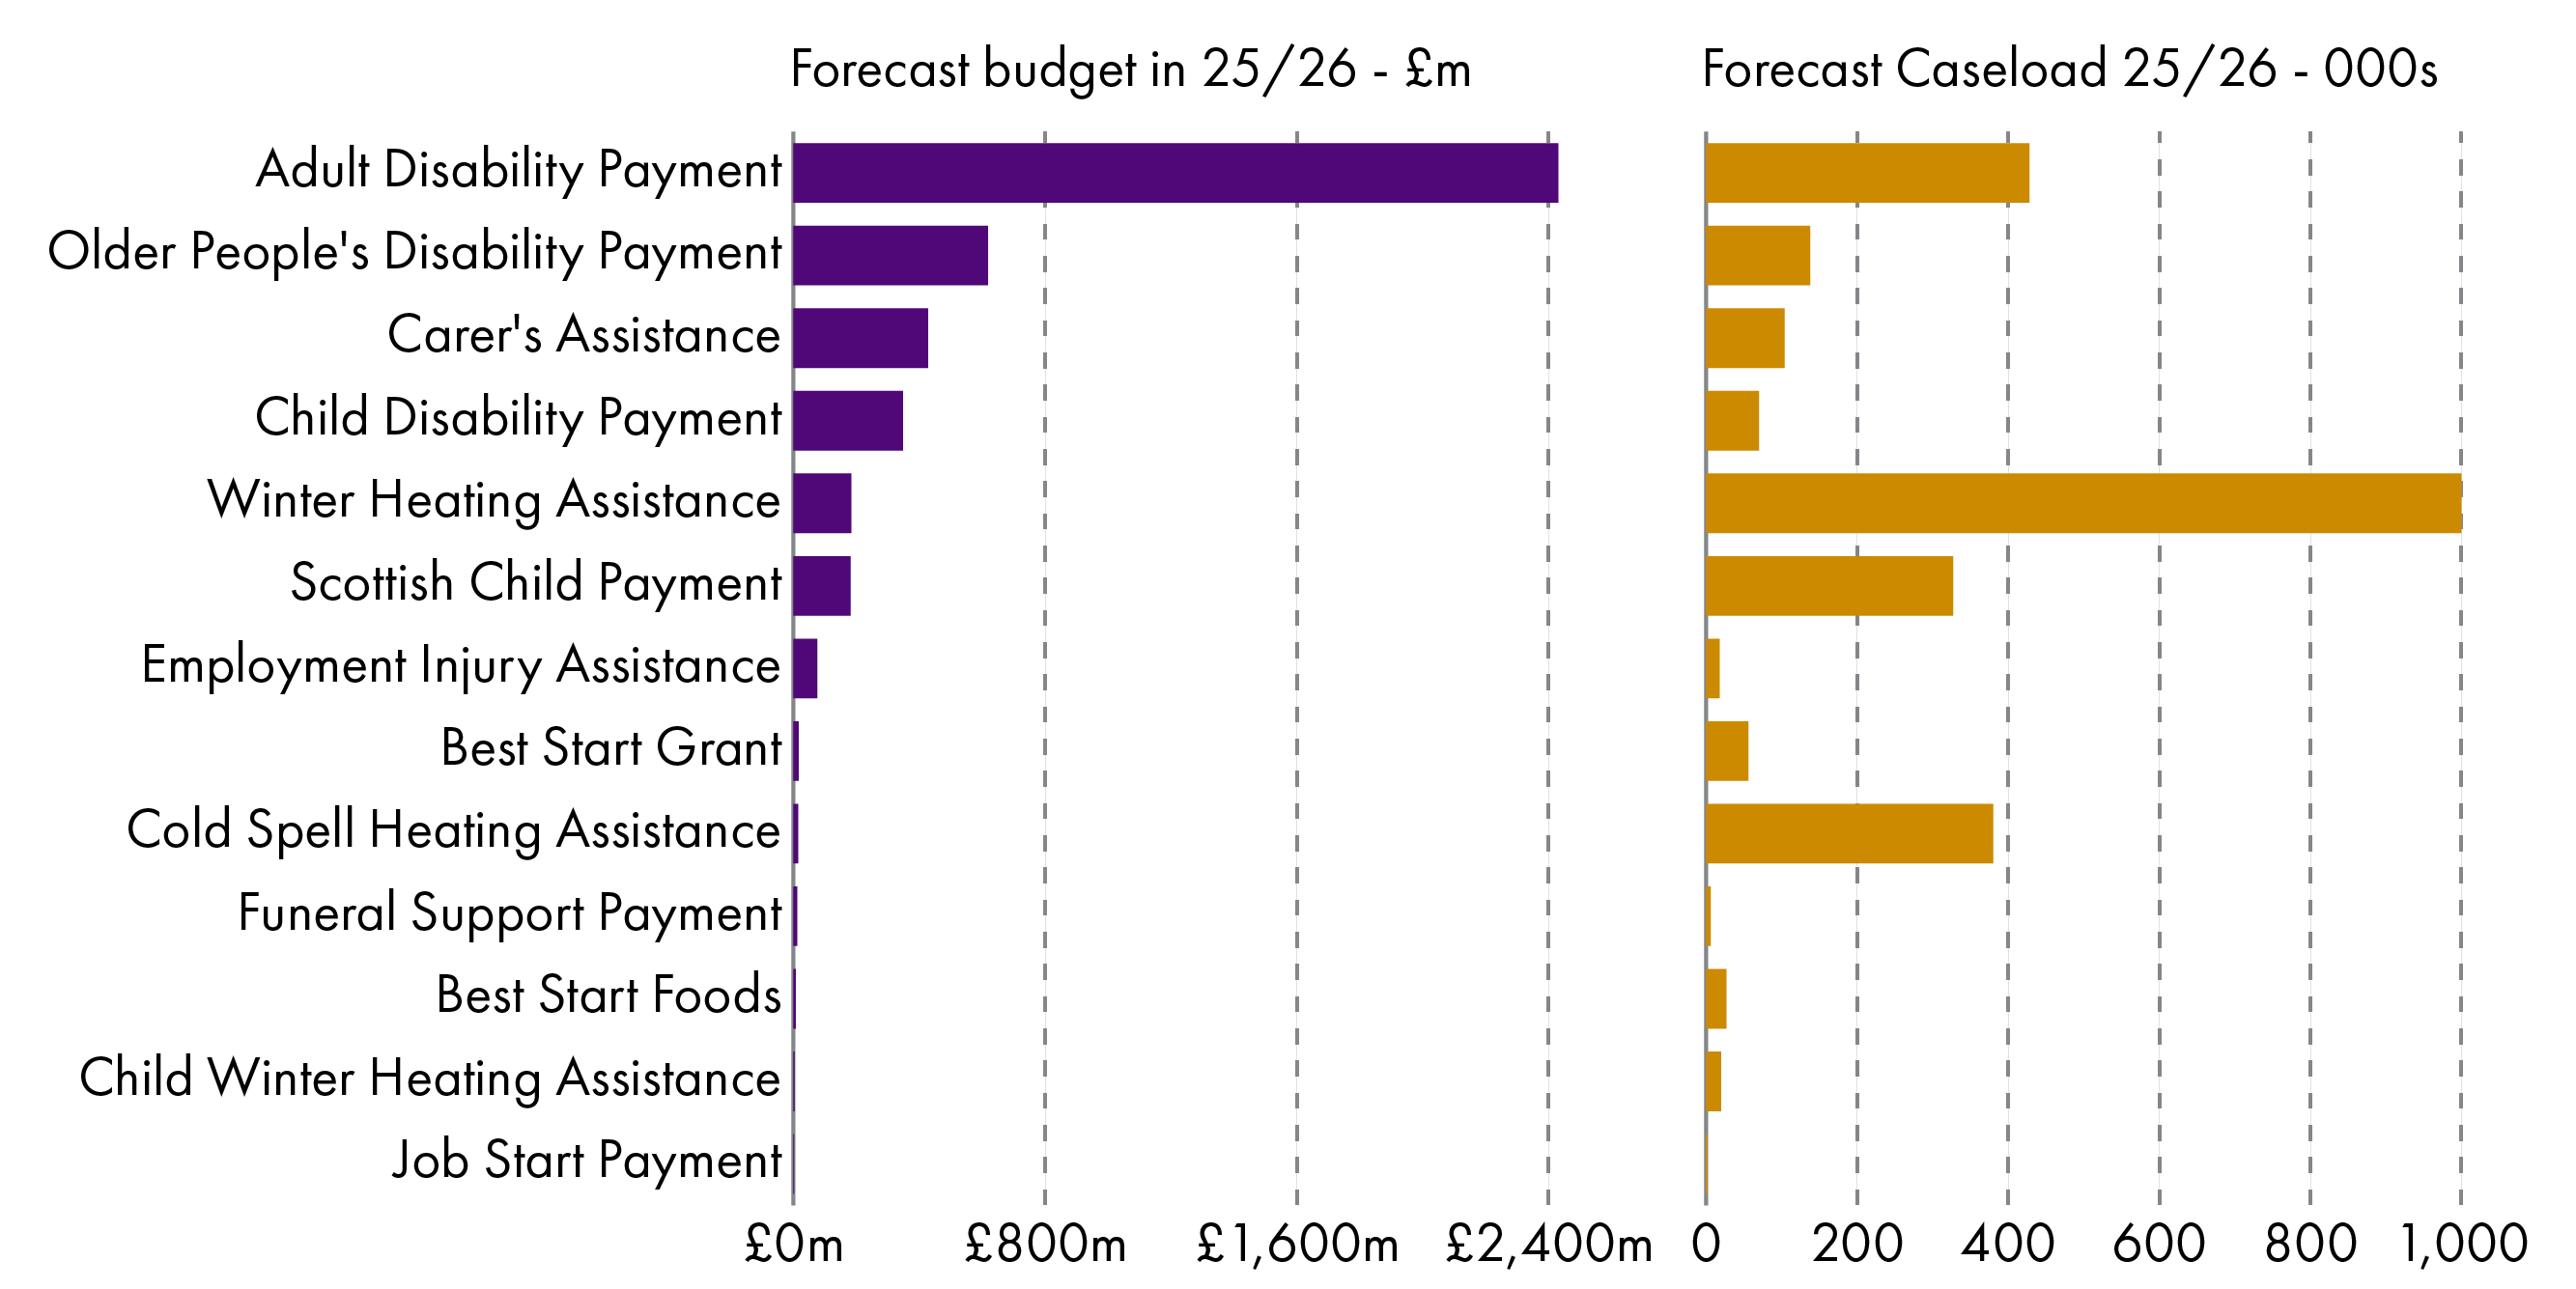 This infographic lists the benefits that Social Security Scotland is expected to be administering by 2025, showing budget and caseload for each, and assuming devolved benefits are transferred from DWP as planned. The largest budget by a very long way is Adult disability payment at £2.4bn. The largest caseload is Winter heating assistance at c.1m households.